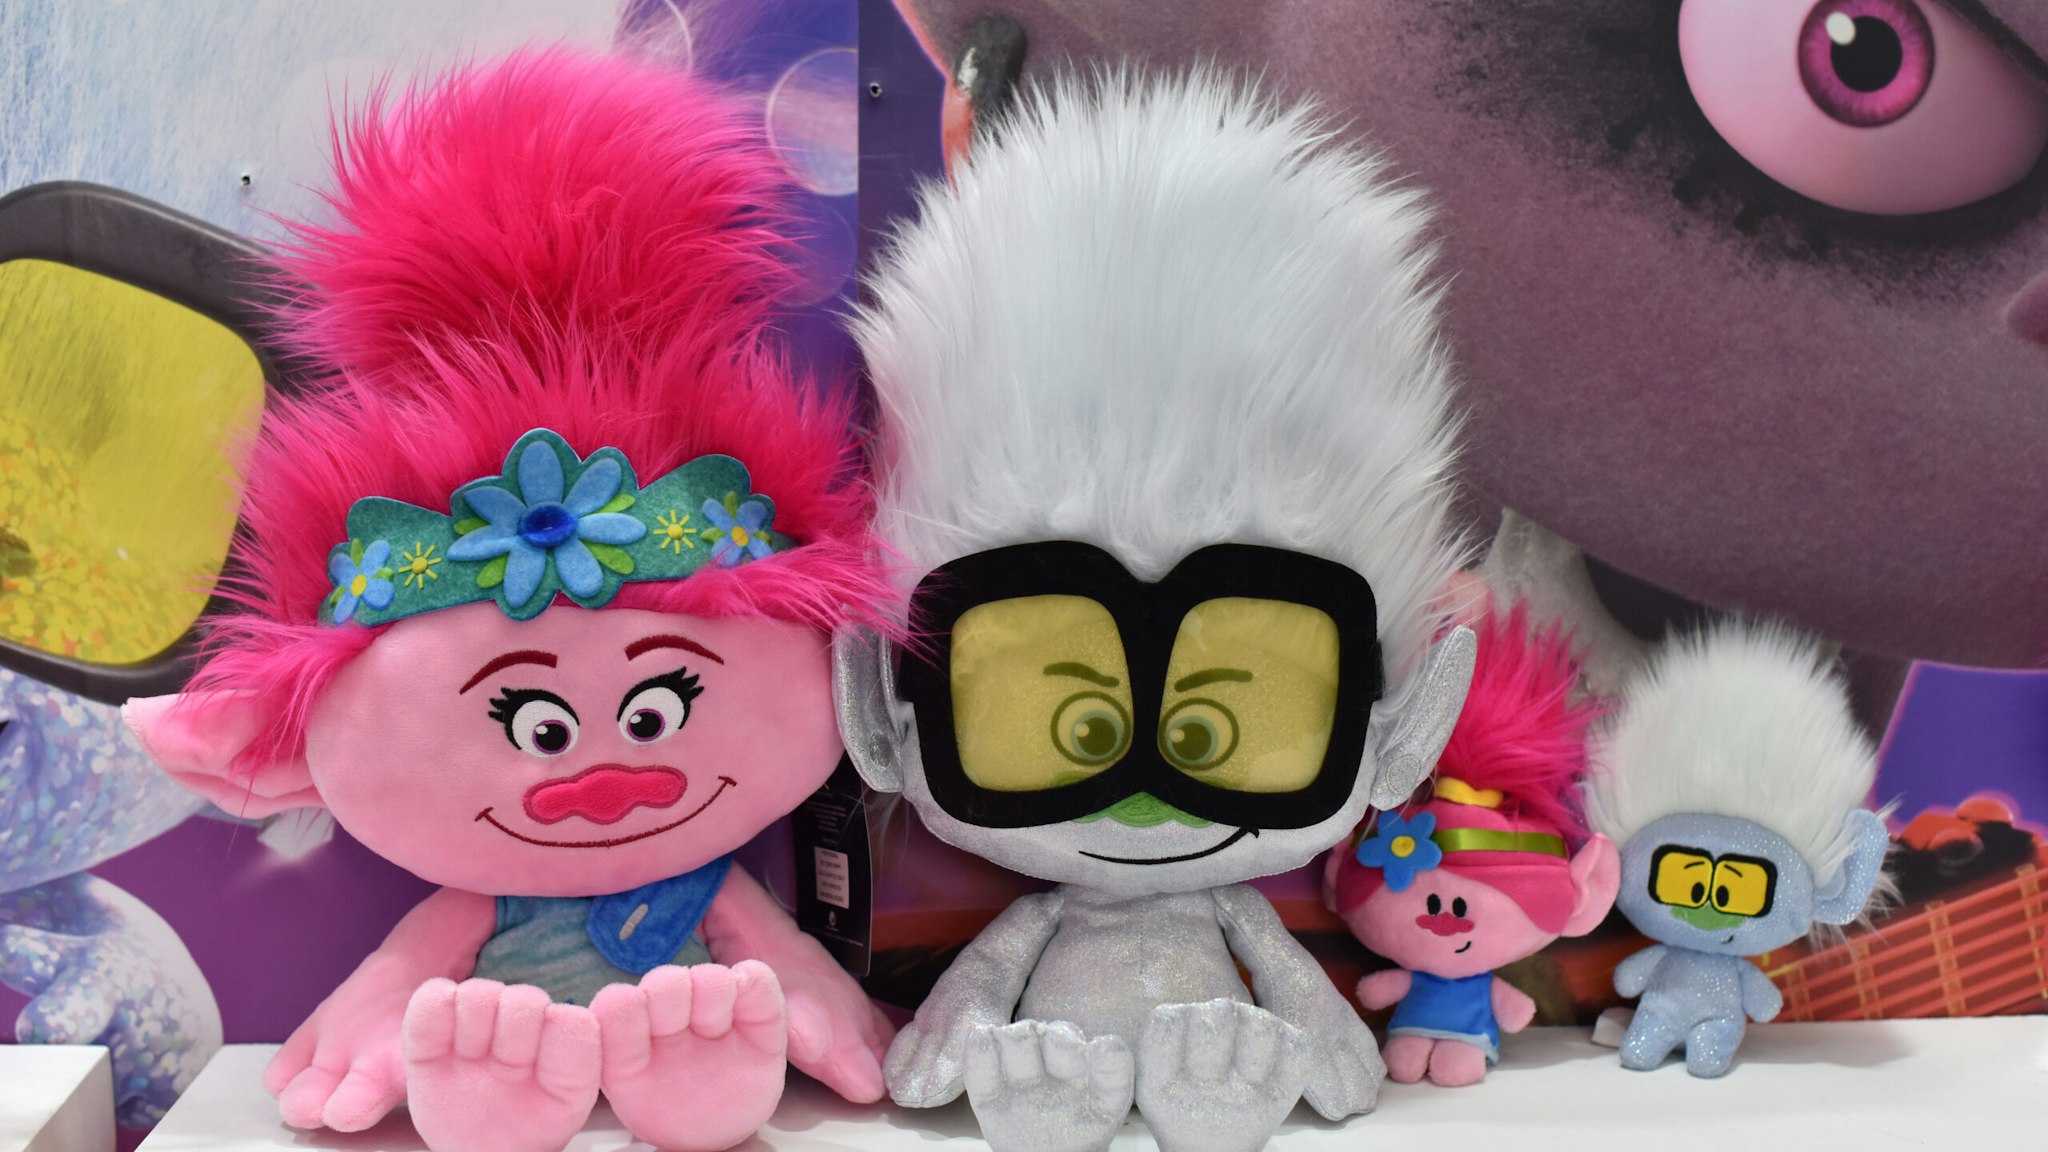 LONDON, ENGLAND - JANUARY 21: Dreamworks Trolls World Tour soft toys on display during the Toy Fair at Olympia London on January 21, 2020 in London, England. The Toy Fair is the UK’s largest dedicated toy, game and hobby trade show welcoming more than 270 companies exhibiting thousands of products. (Photo by John Keeble/Getty Images)